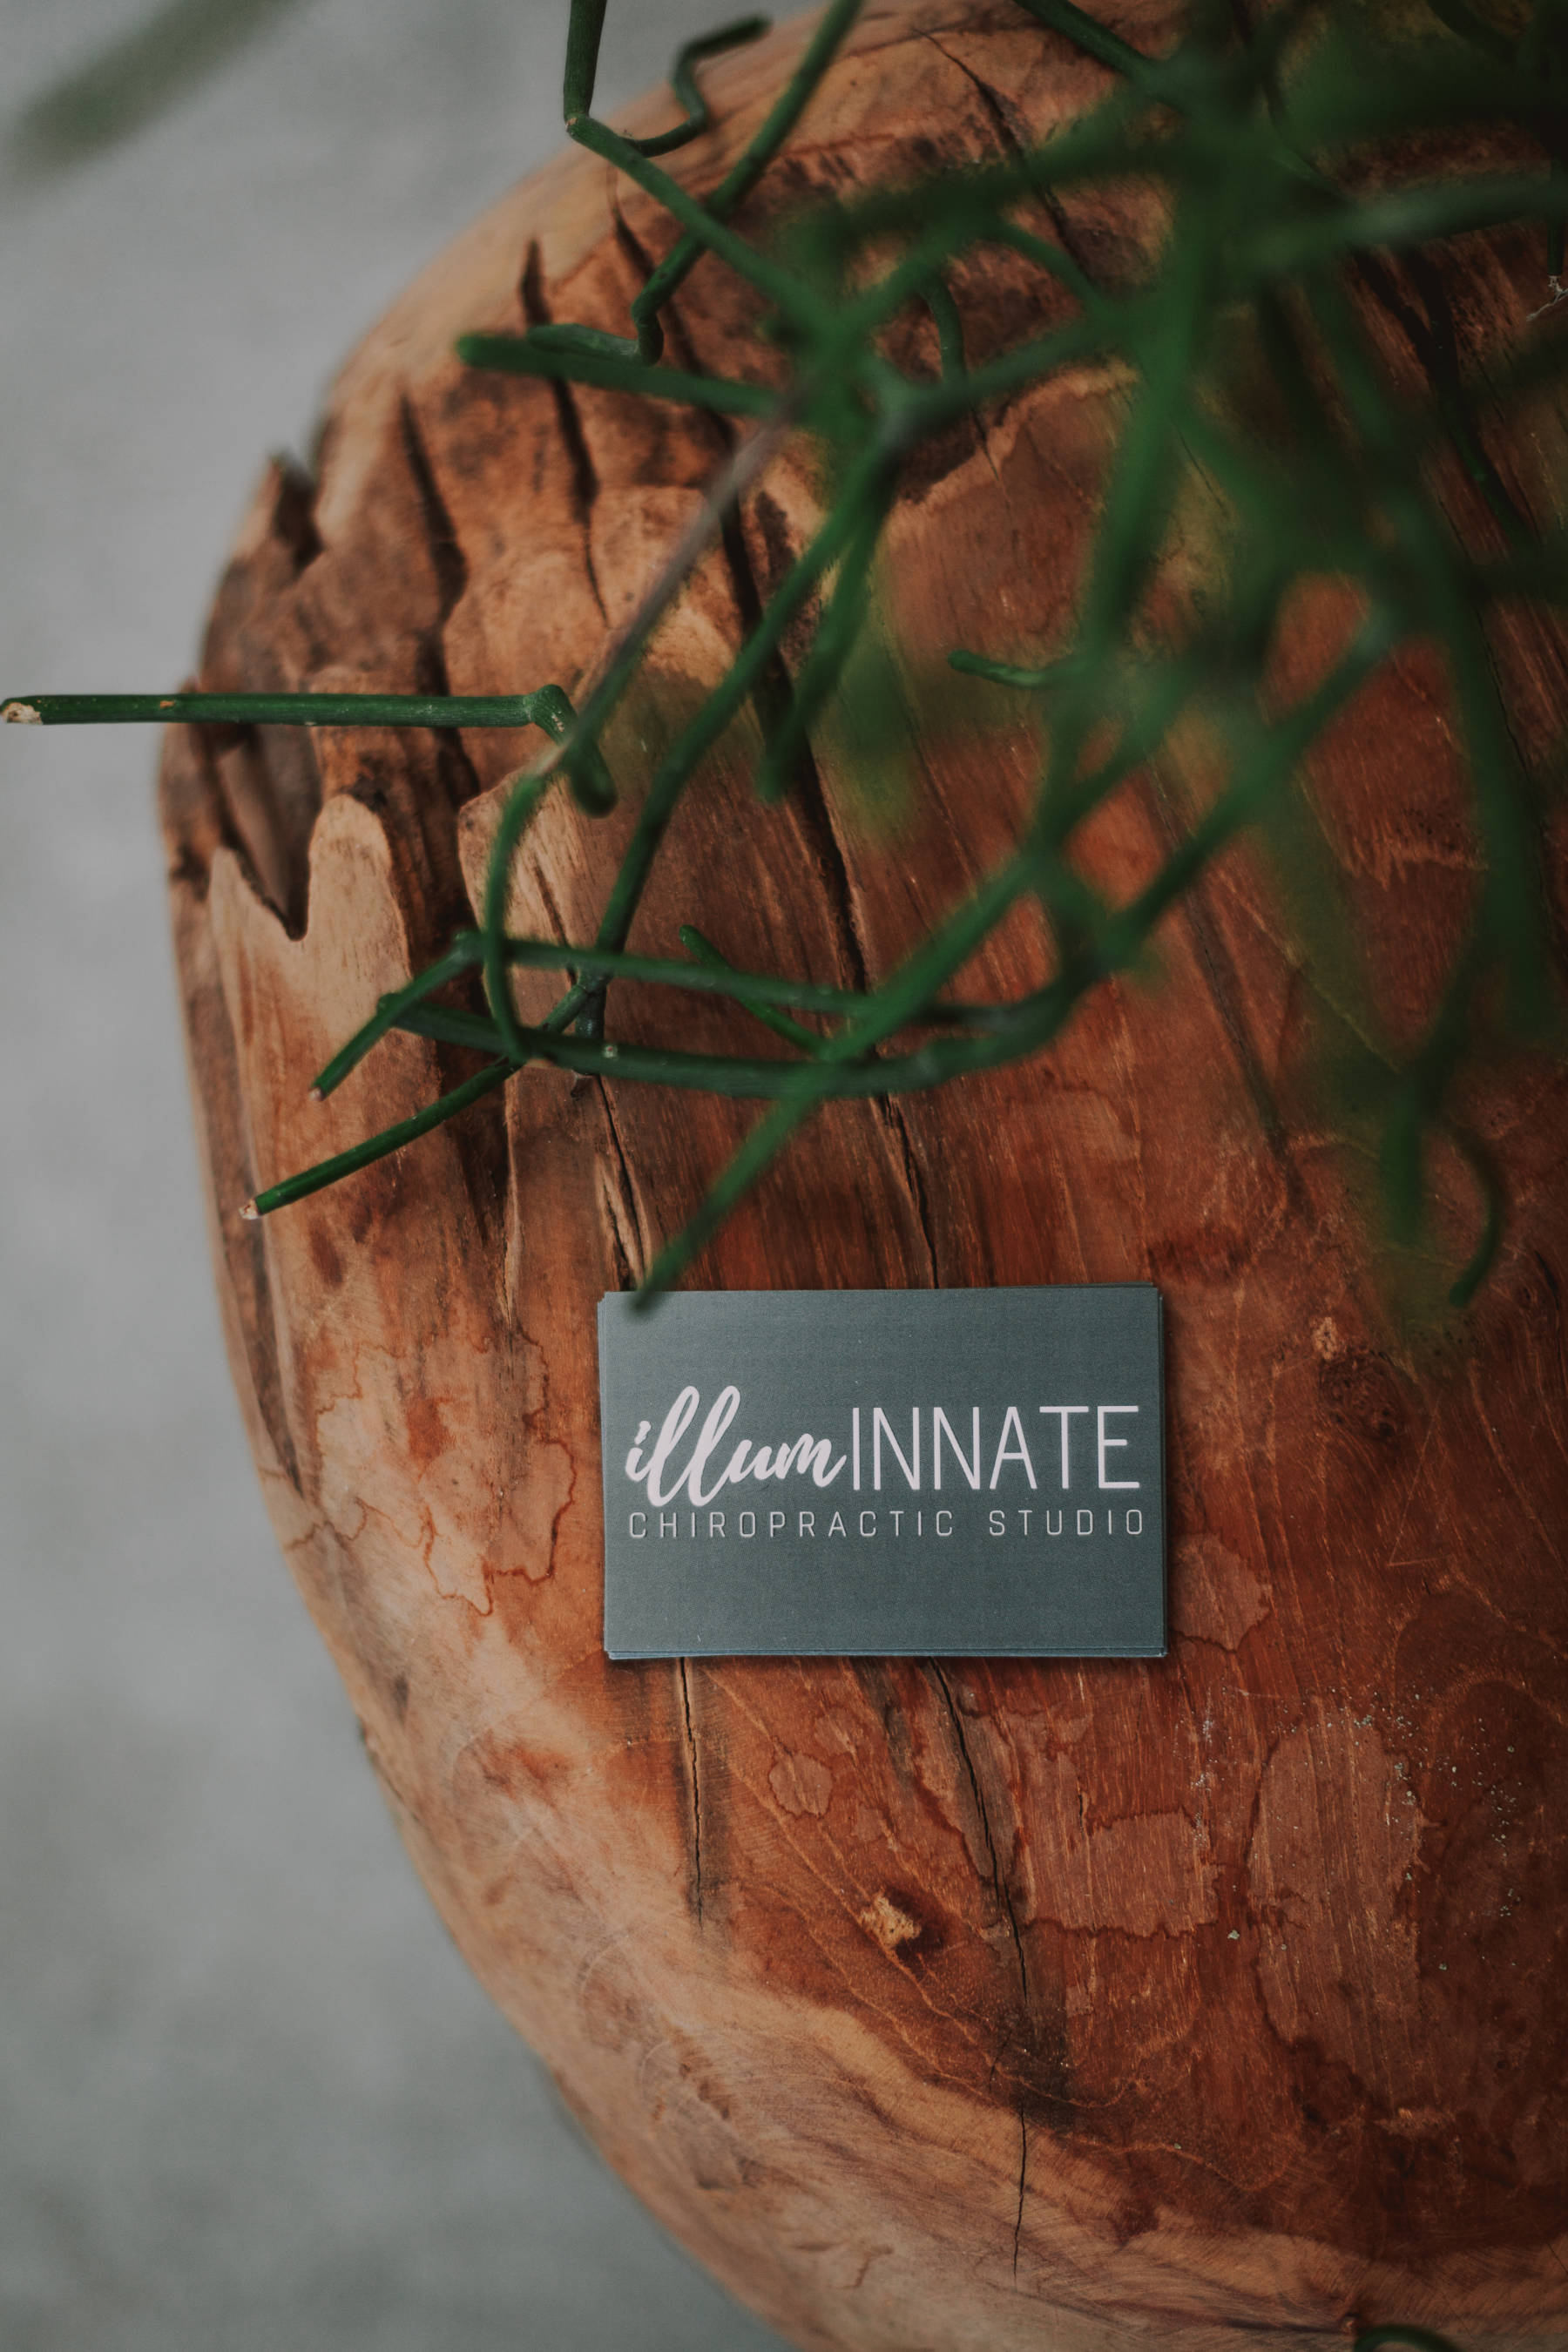 IllumINNATE Chiropractic studio's business cards on a wooden table in a brand photoshoot